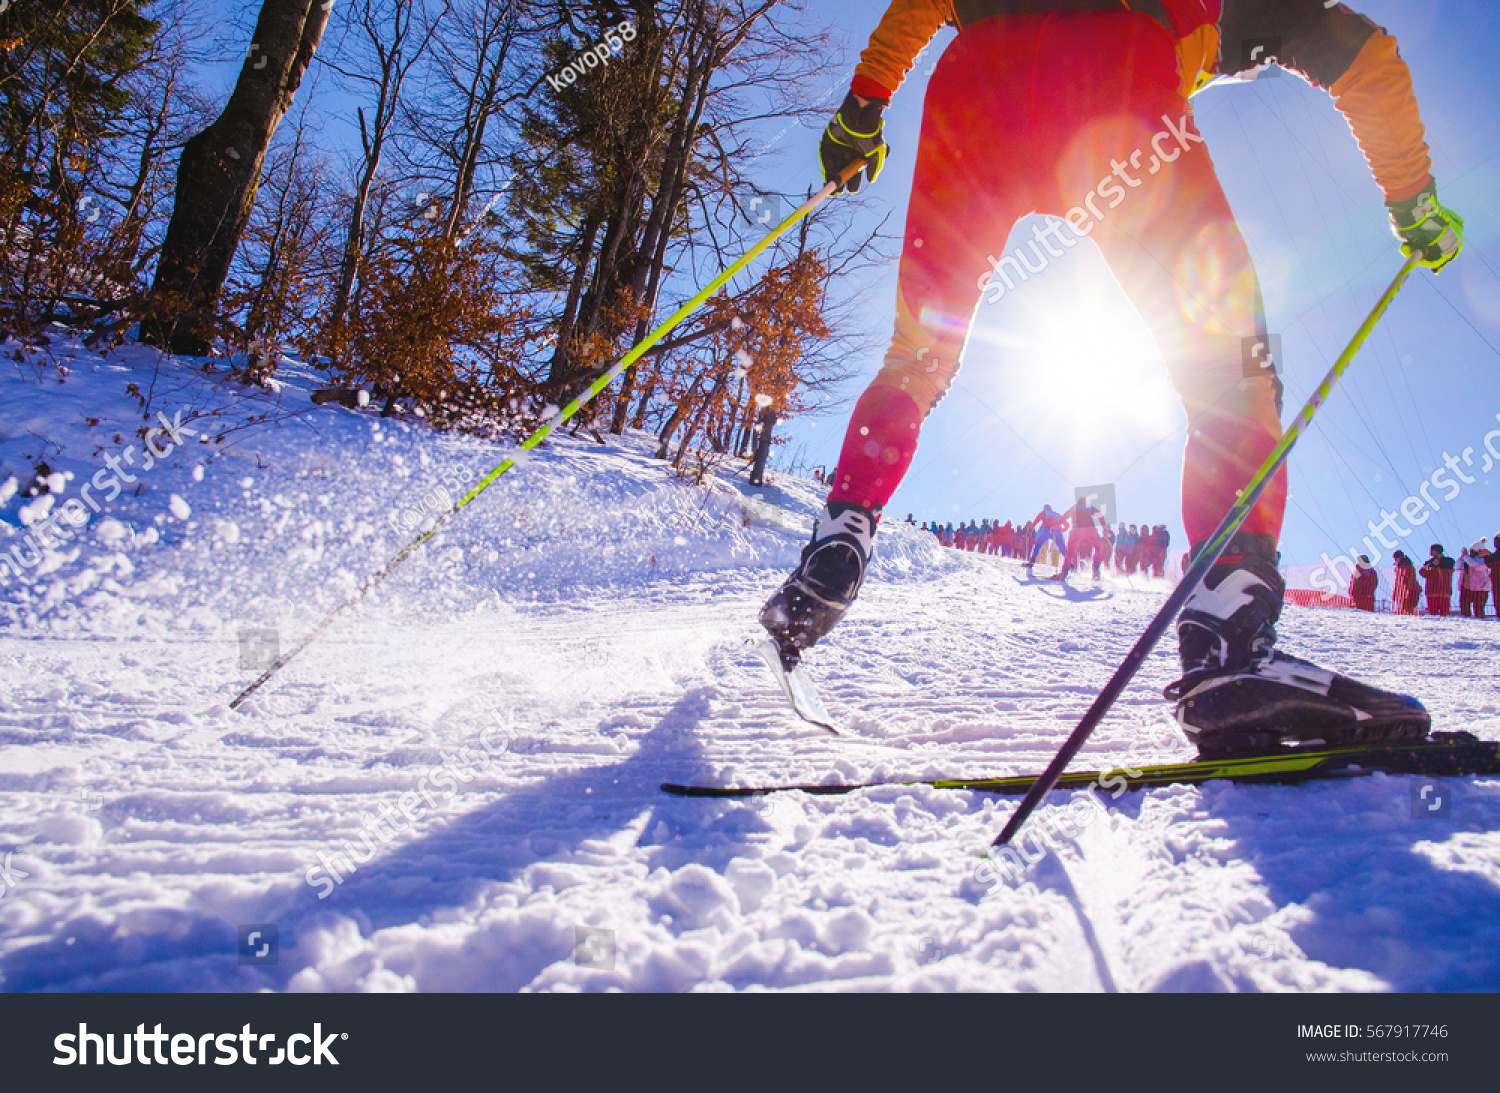 Nordic ski skier on the track in winter - sport active photo with space for your montage - Illustration picture for winter olympic game in pyeongchang 2018 #567917746